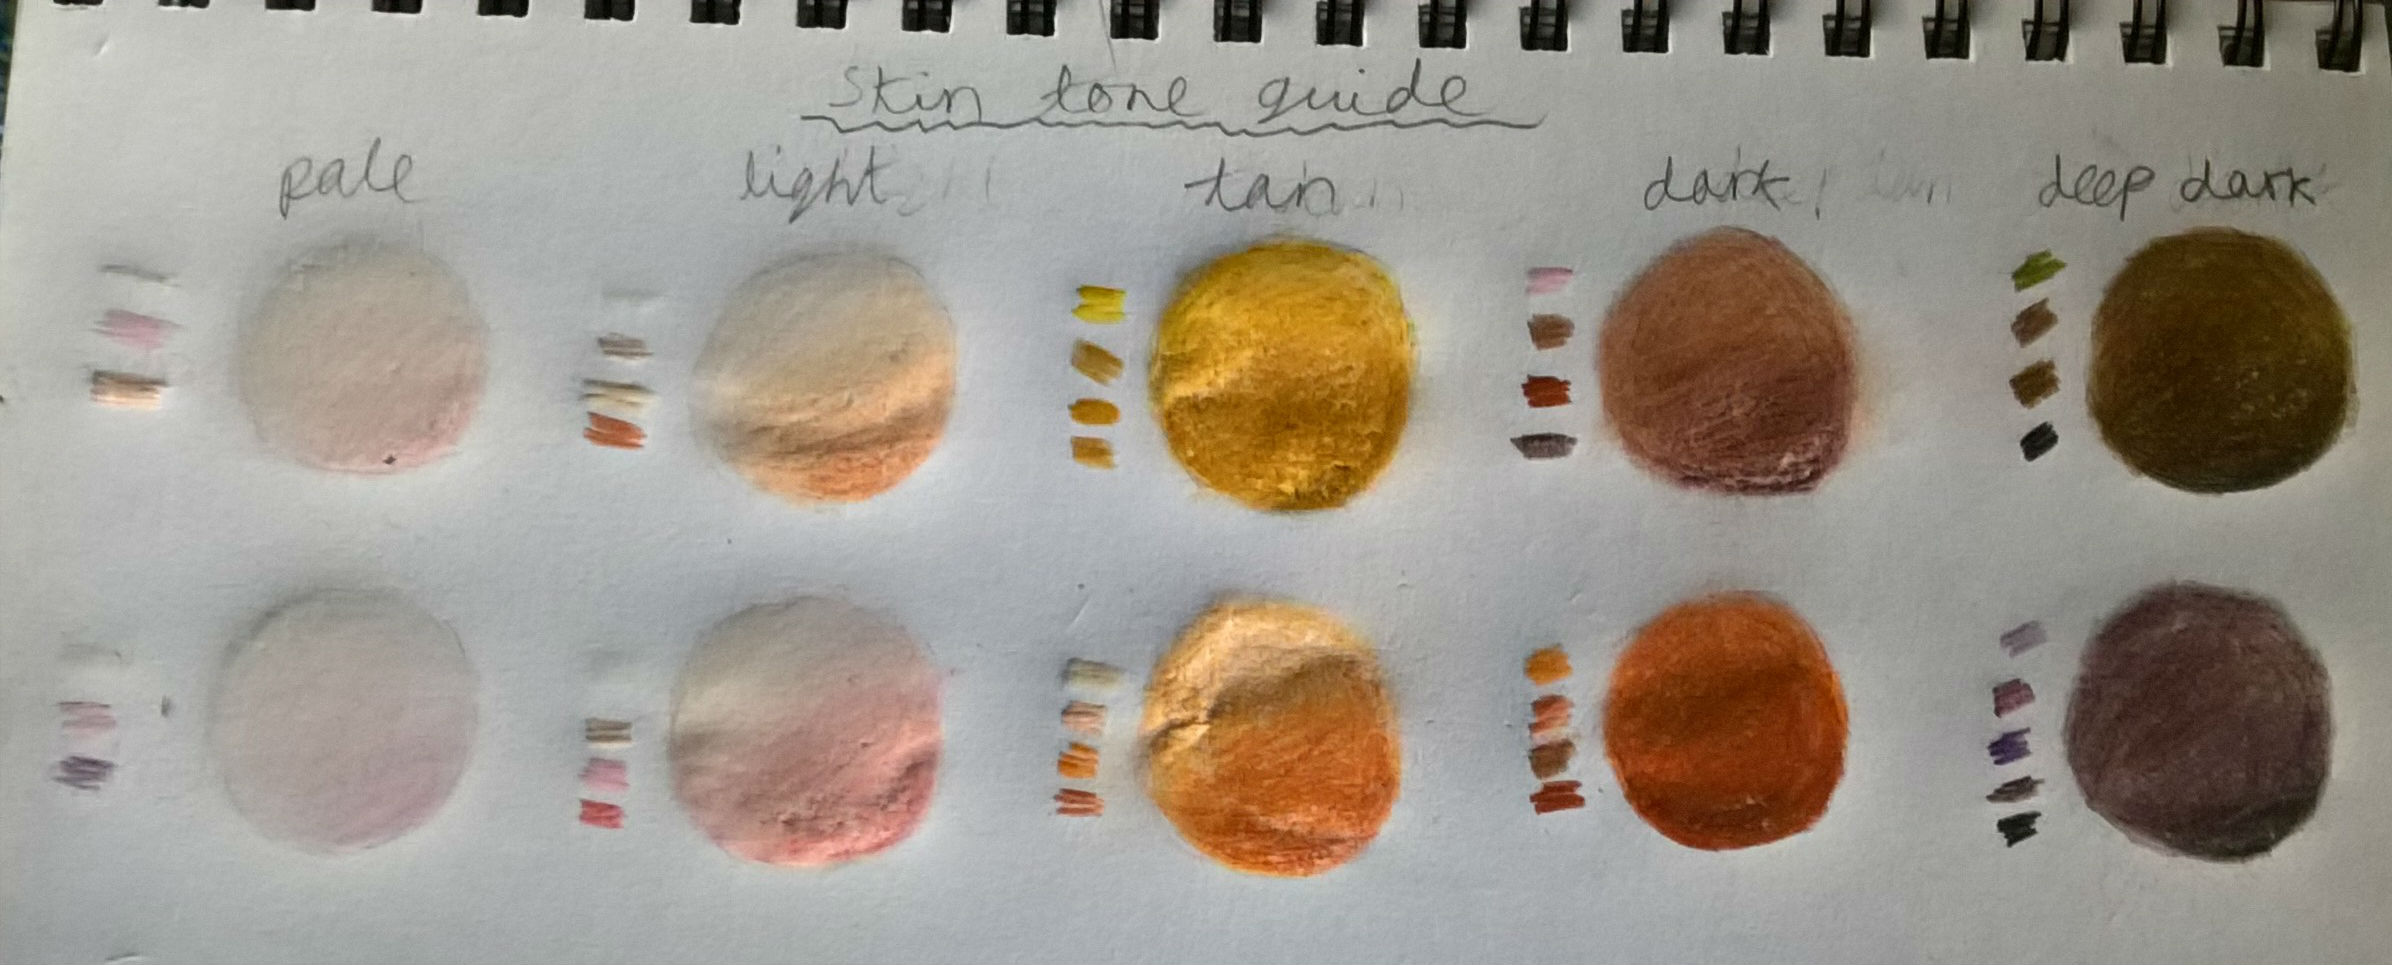 Colouring Pencil Skin Tone Guide - Archive - Dripping Quills